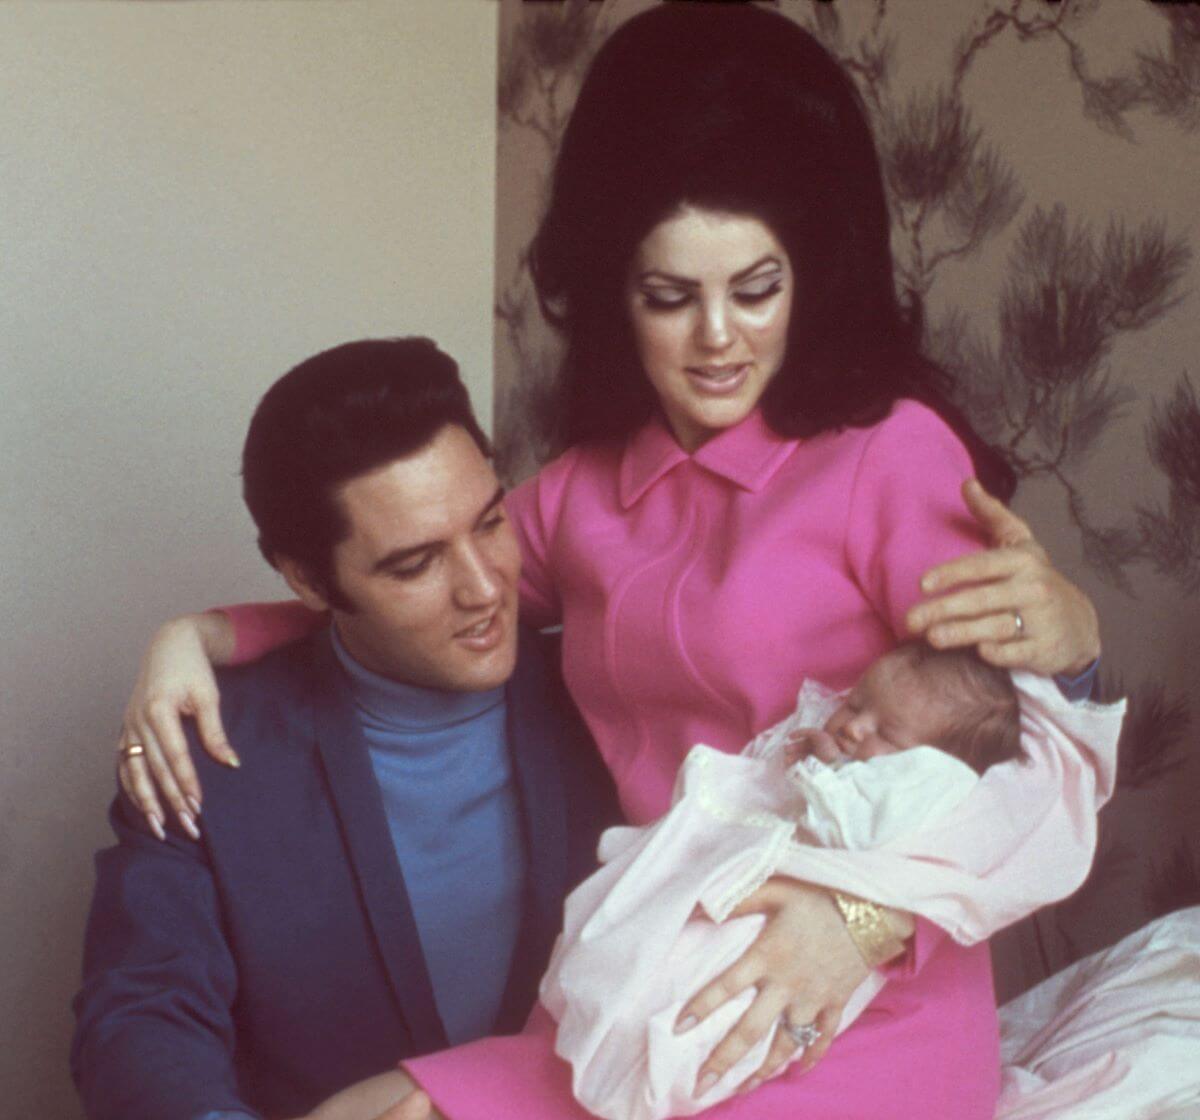 You are currently viewing Priscilla Presley Said Elvis’ ‘Unusually Close’ Relationship With His Mom Made Him Feel Strangely About Her After She Gave Birth